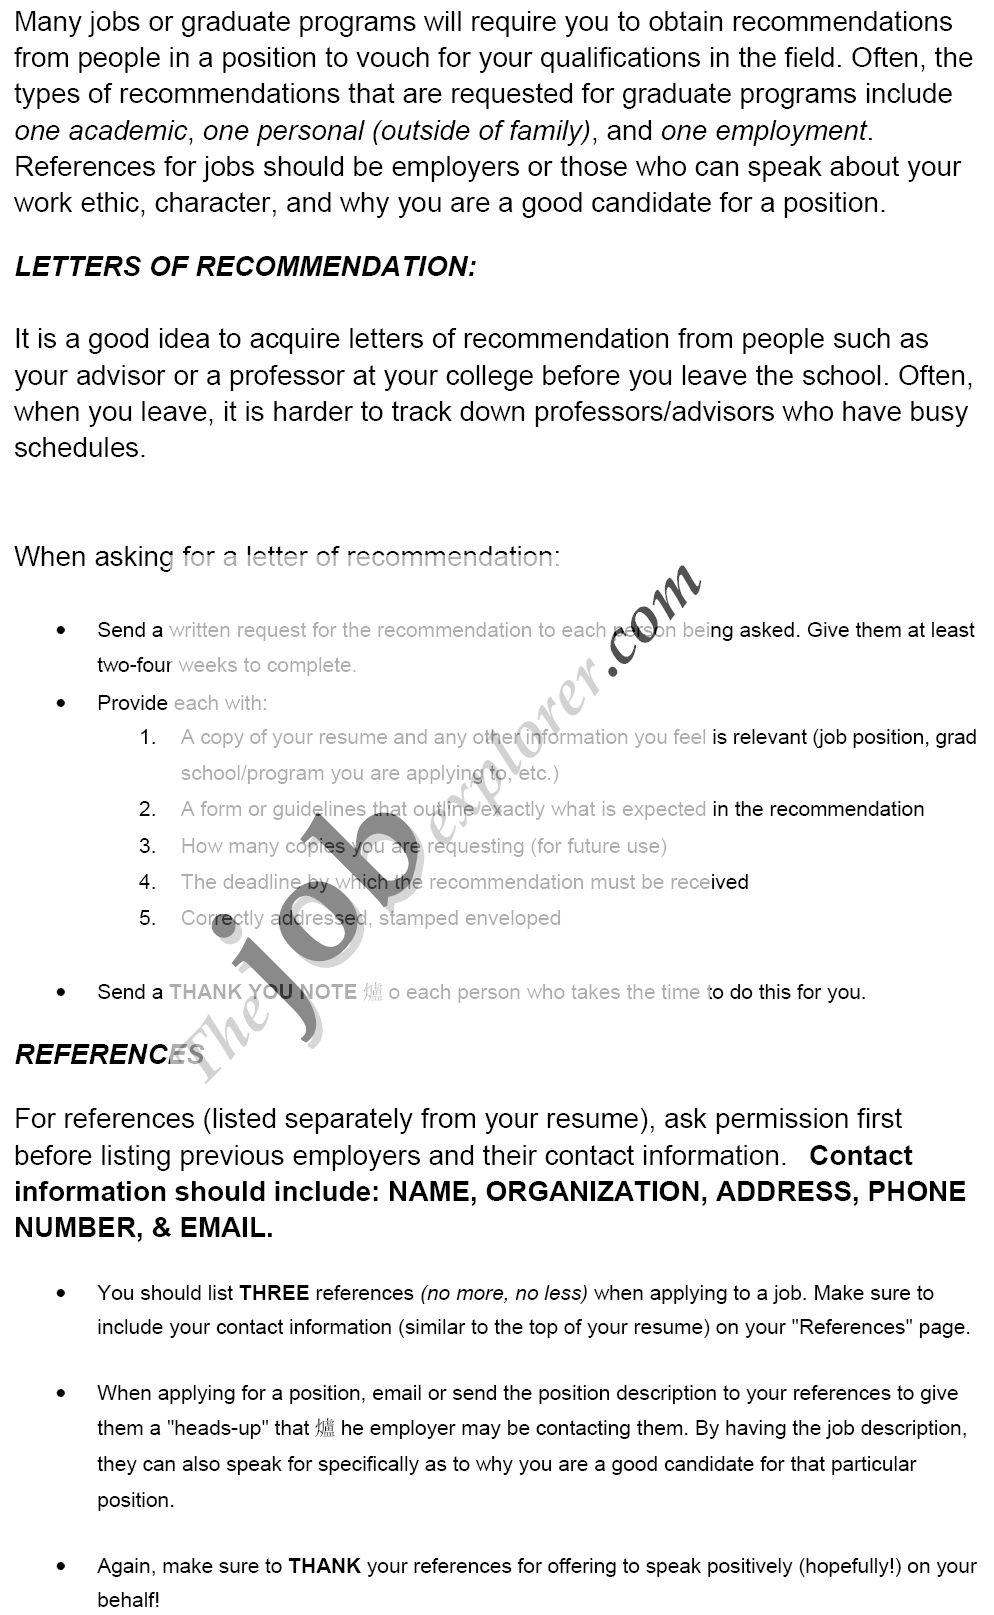 Example Of A Letter Of Recommendation from www.thejobexplorer.com